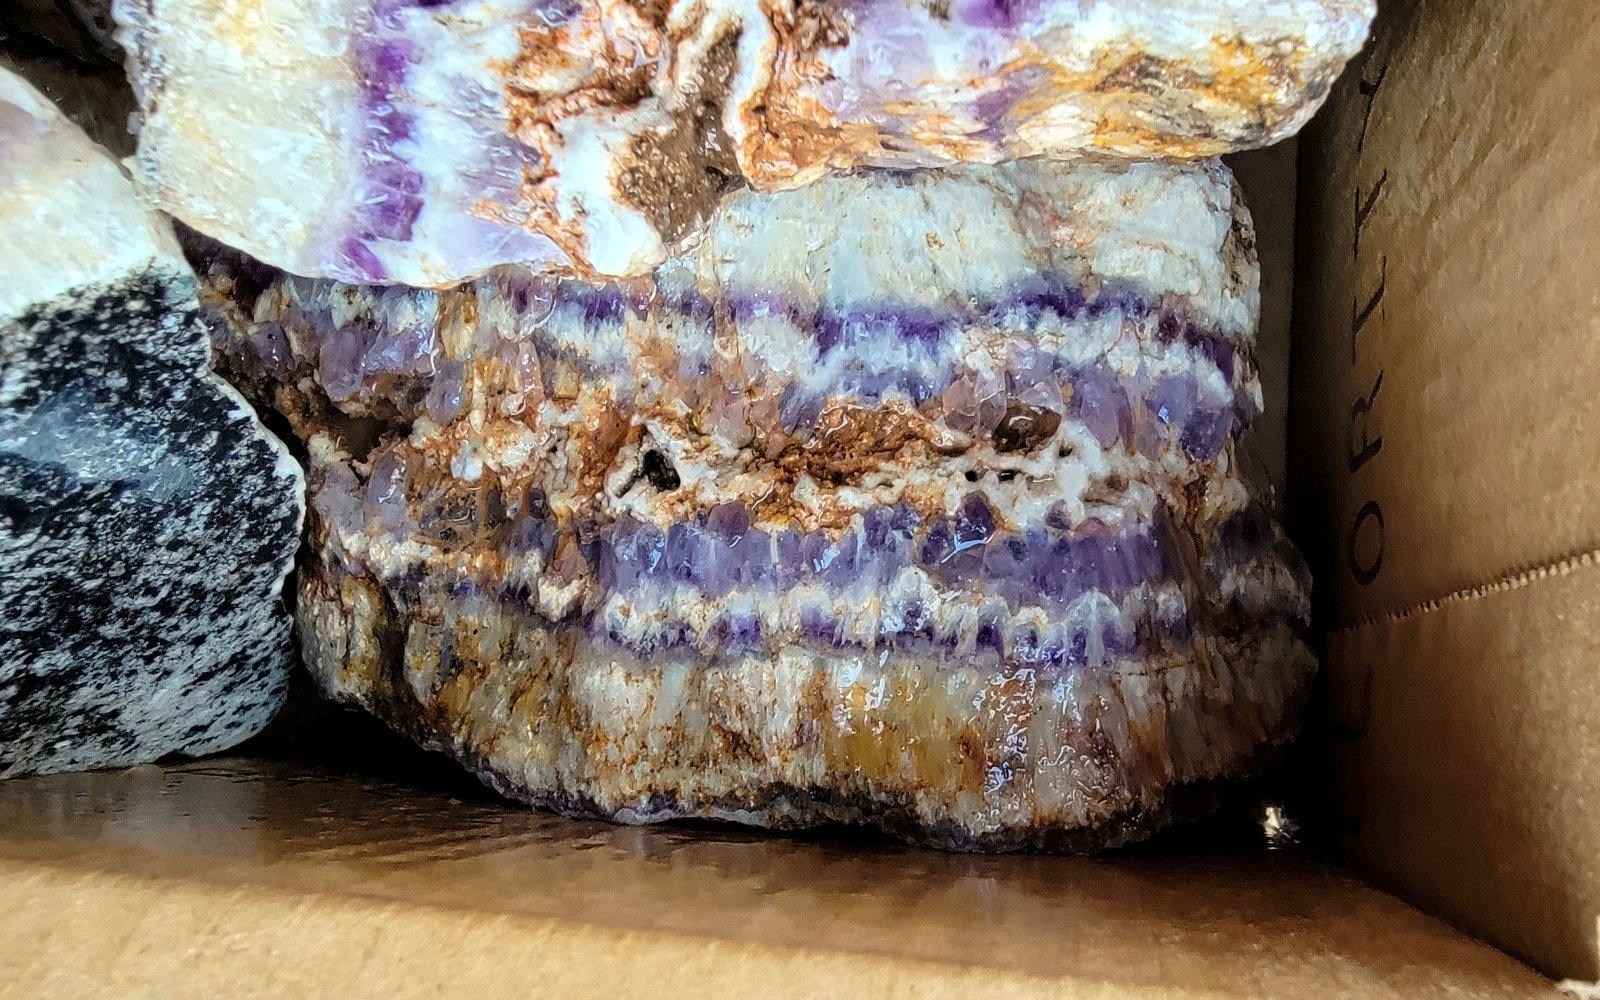 Mexican Chevron Amethyst Cutter Rough Flatrate! - LapidaryCentral